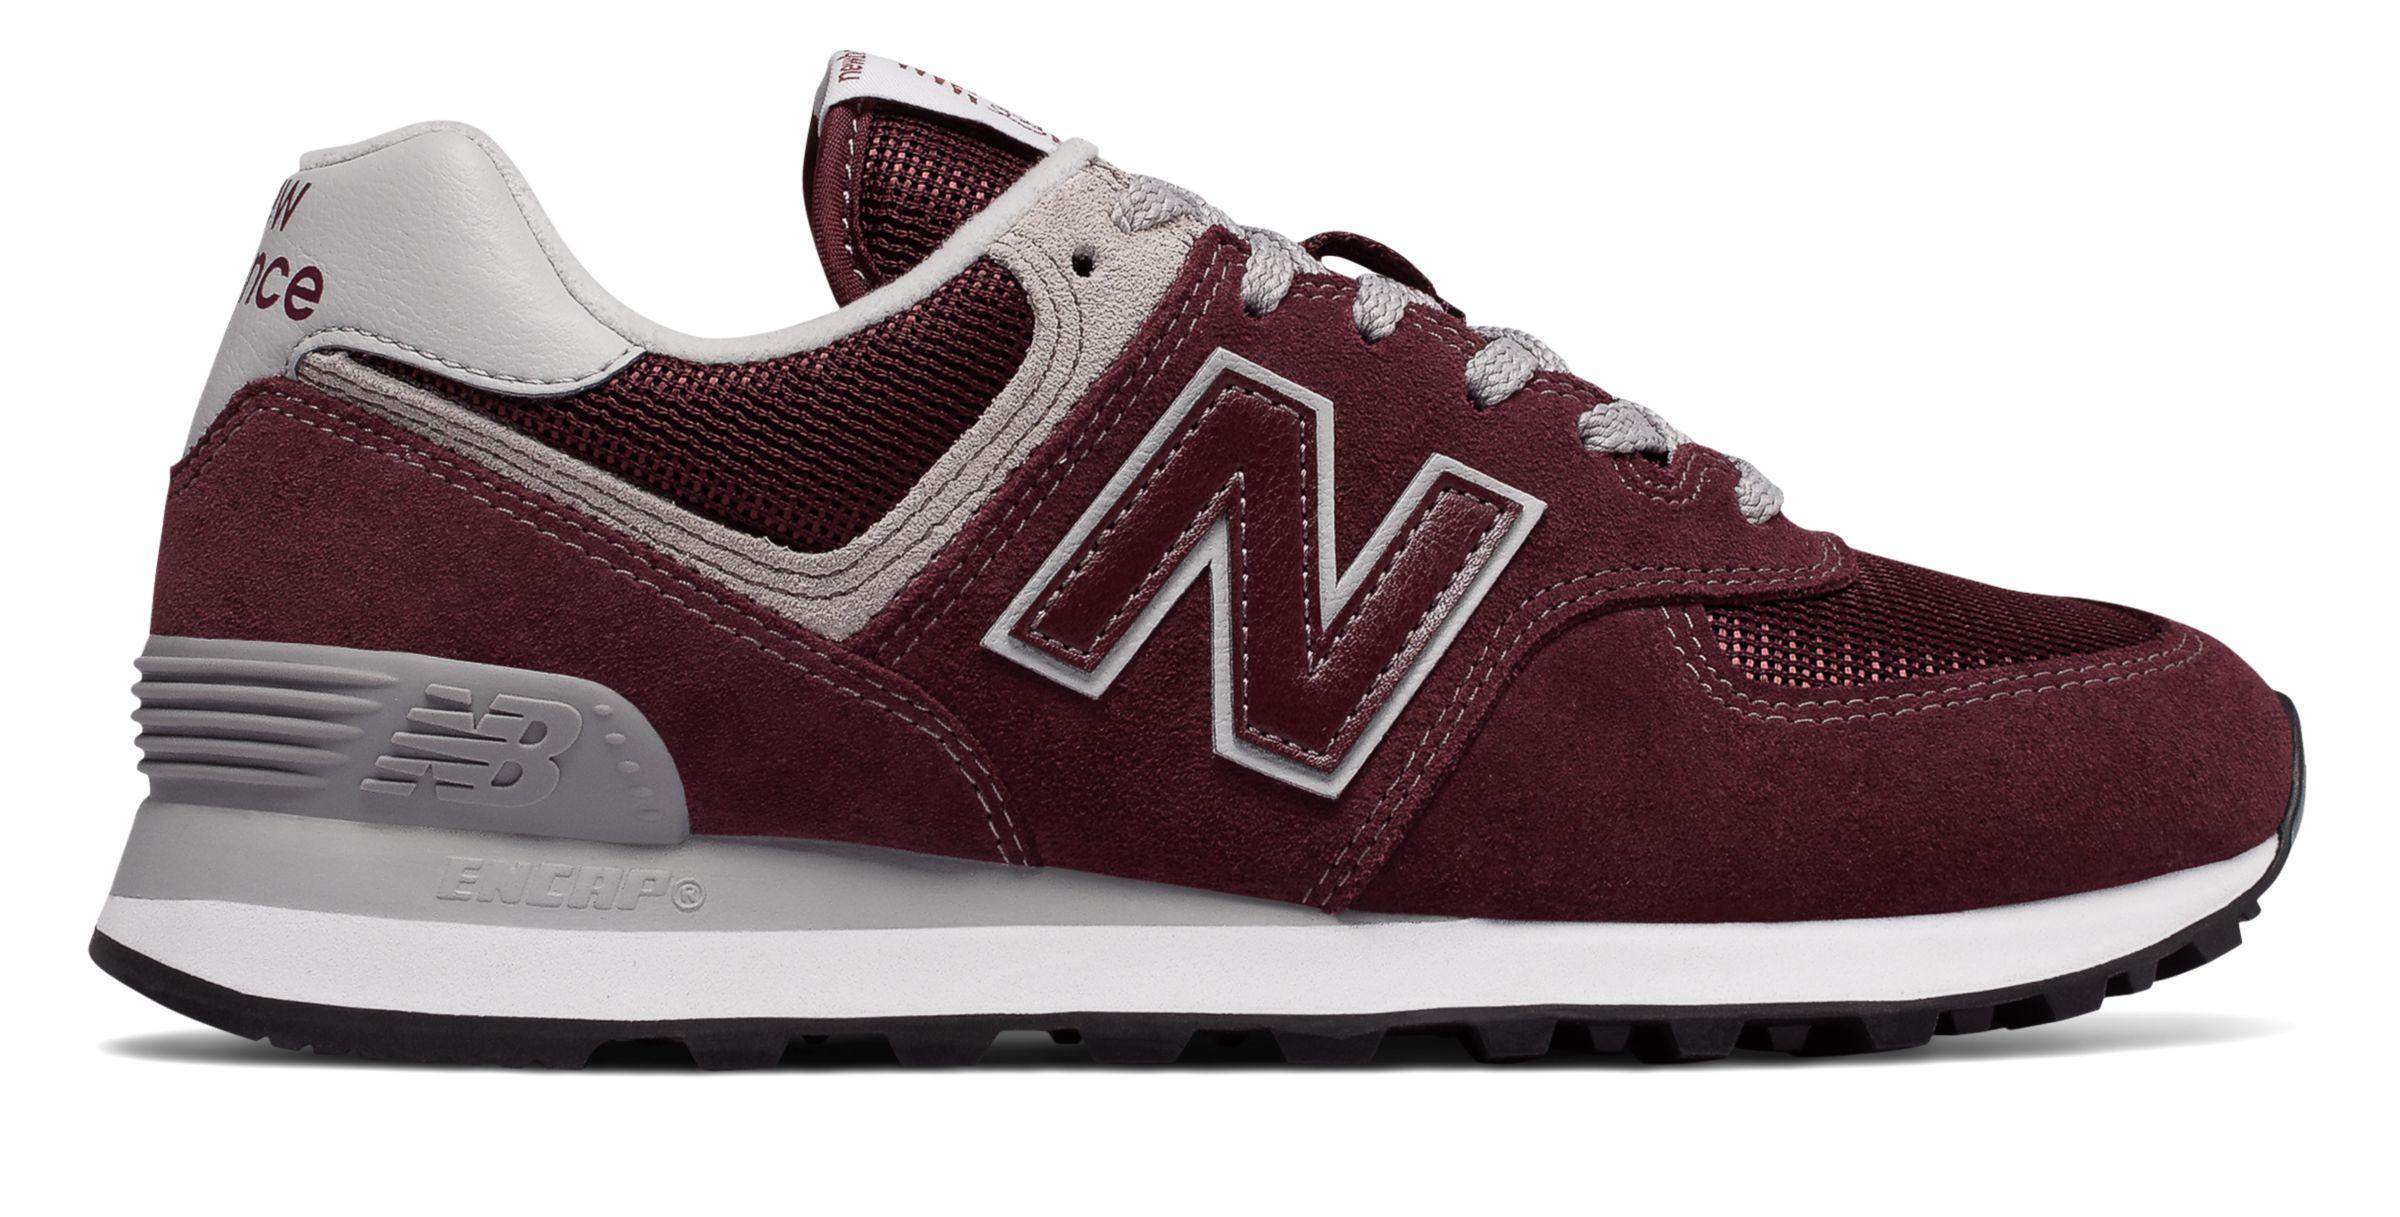 New Balance 574 Core Running Classics Shoes in Red/White (Red) - Lyst